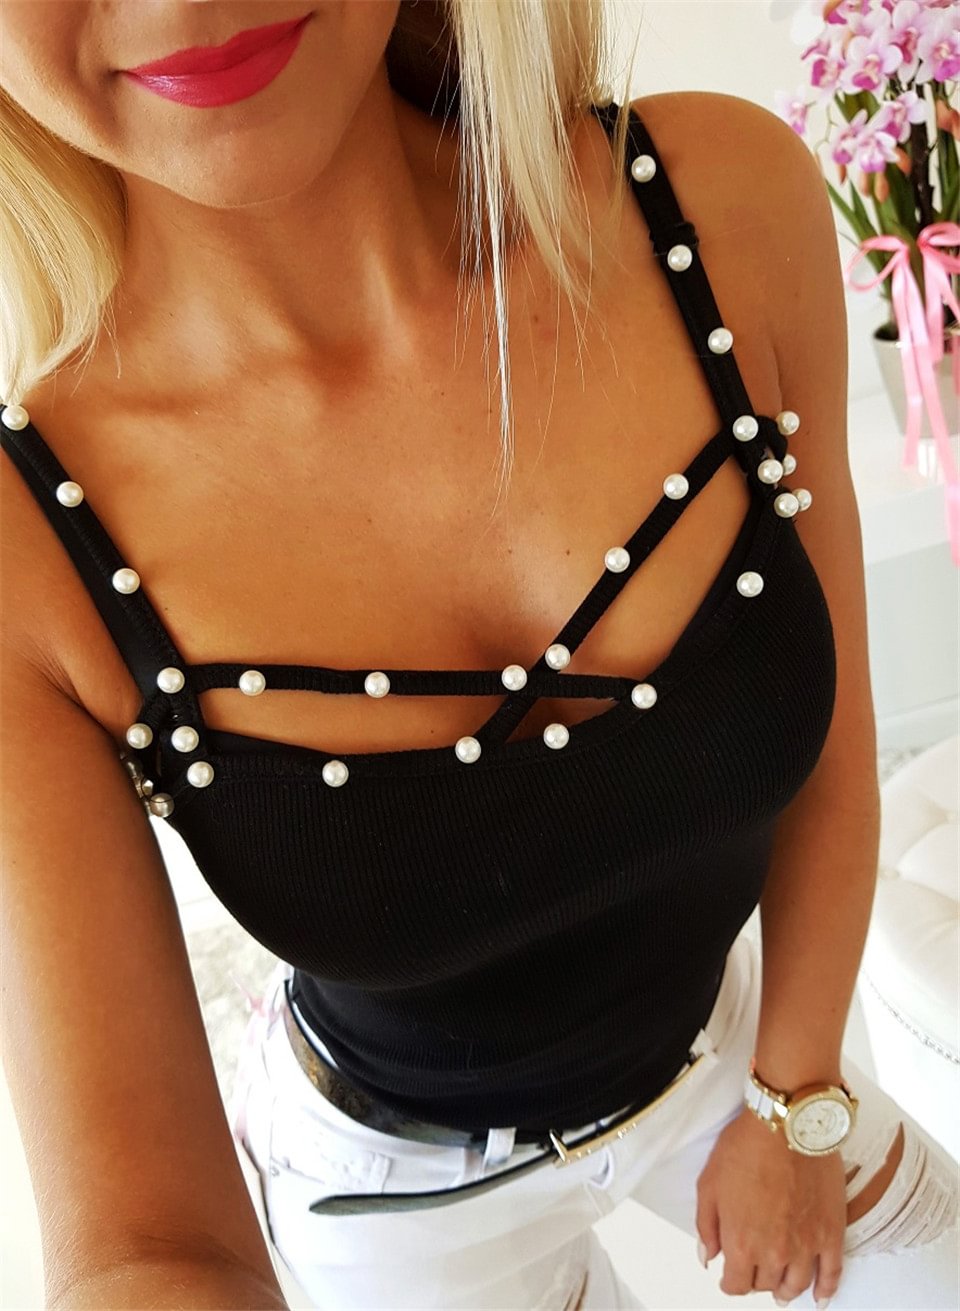 Fongt Women Fashion Top Sexy Sling Pearl Beading Camis Female Solid Color Slim Summer New Cropped Feminino Tops